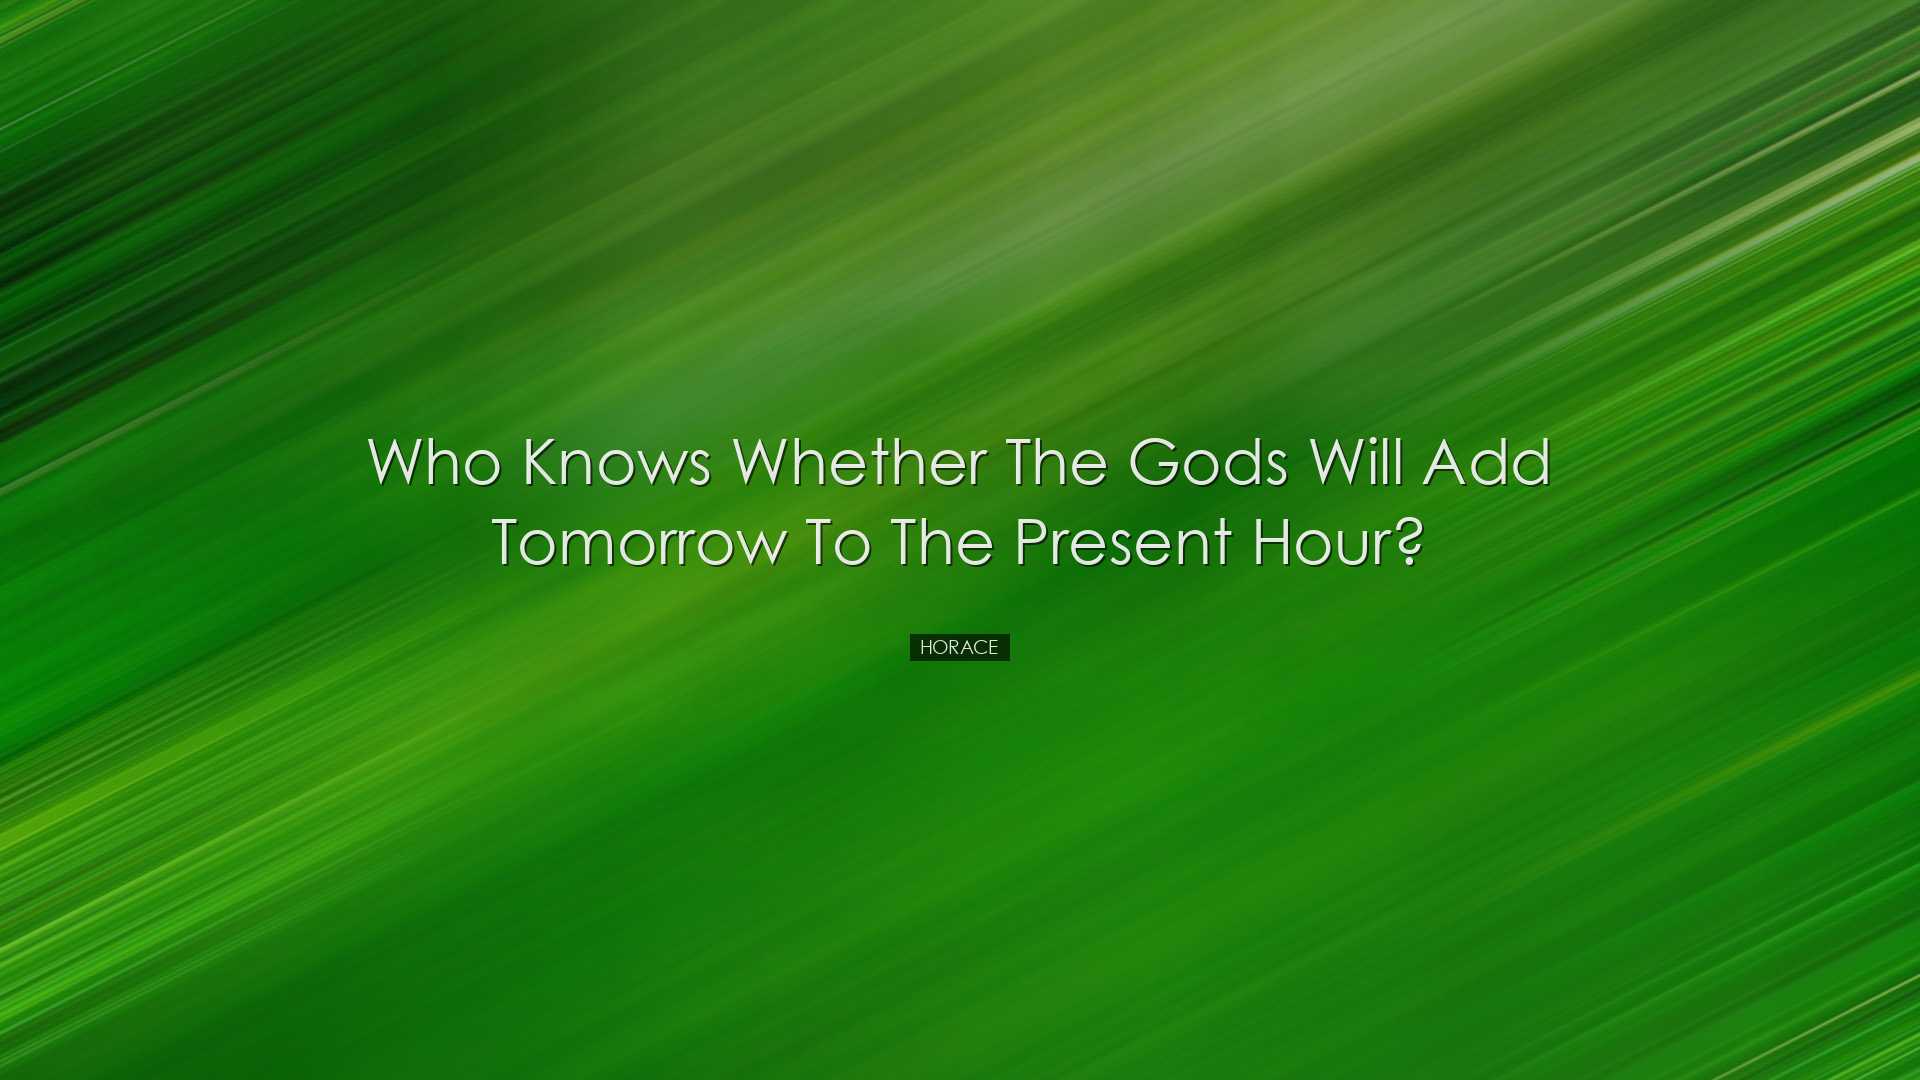 Who knows whether the gods will add tomorrow to the present hour?